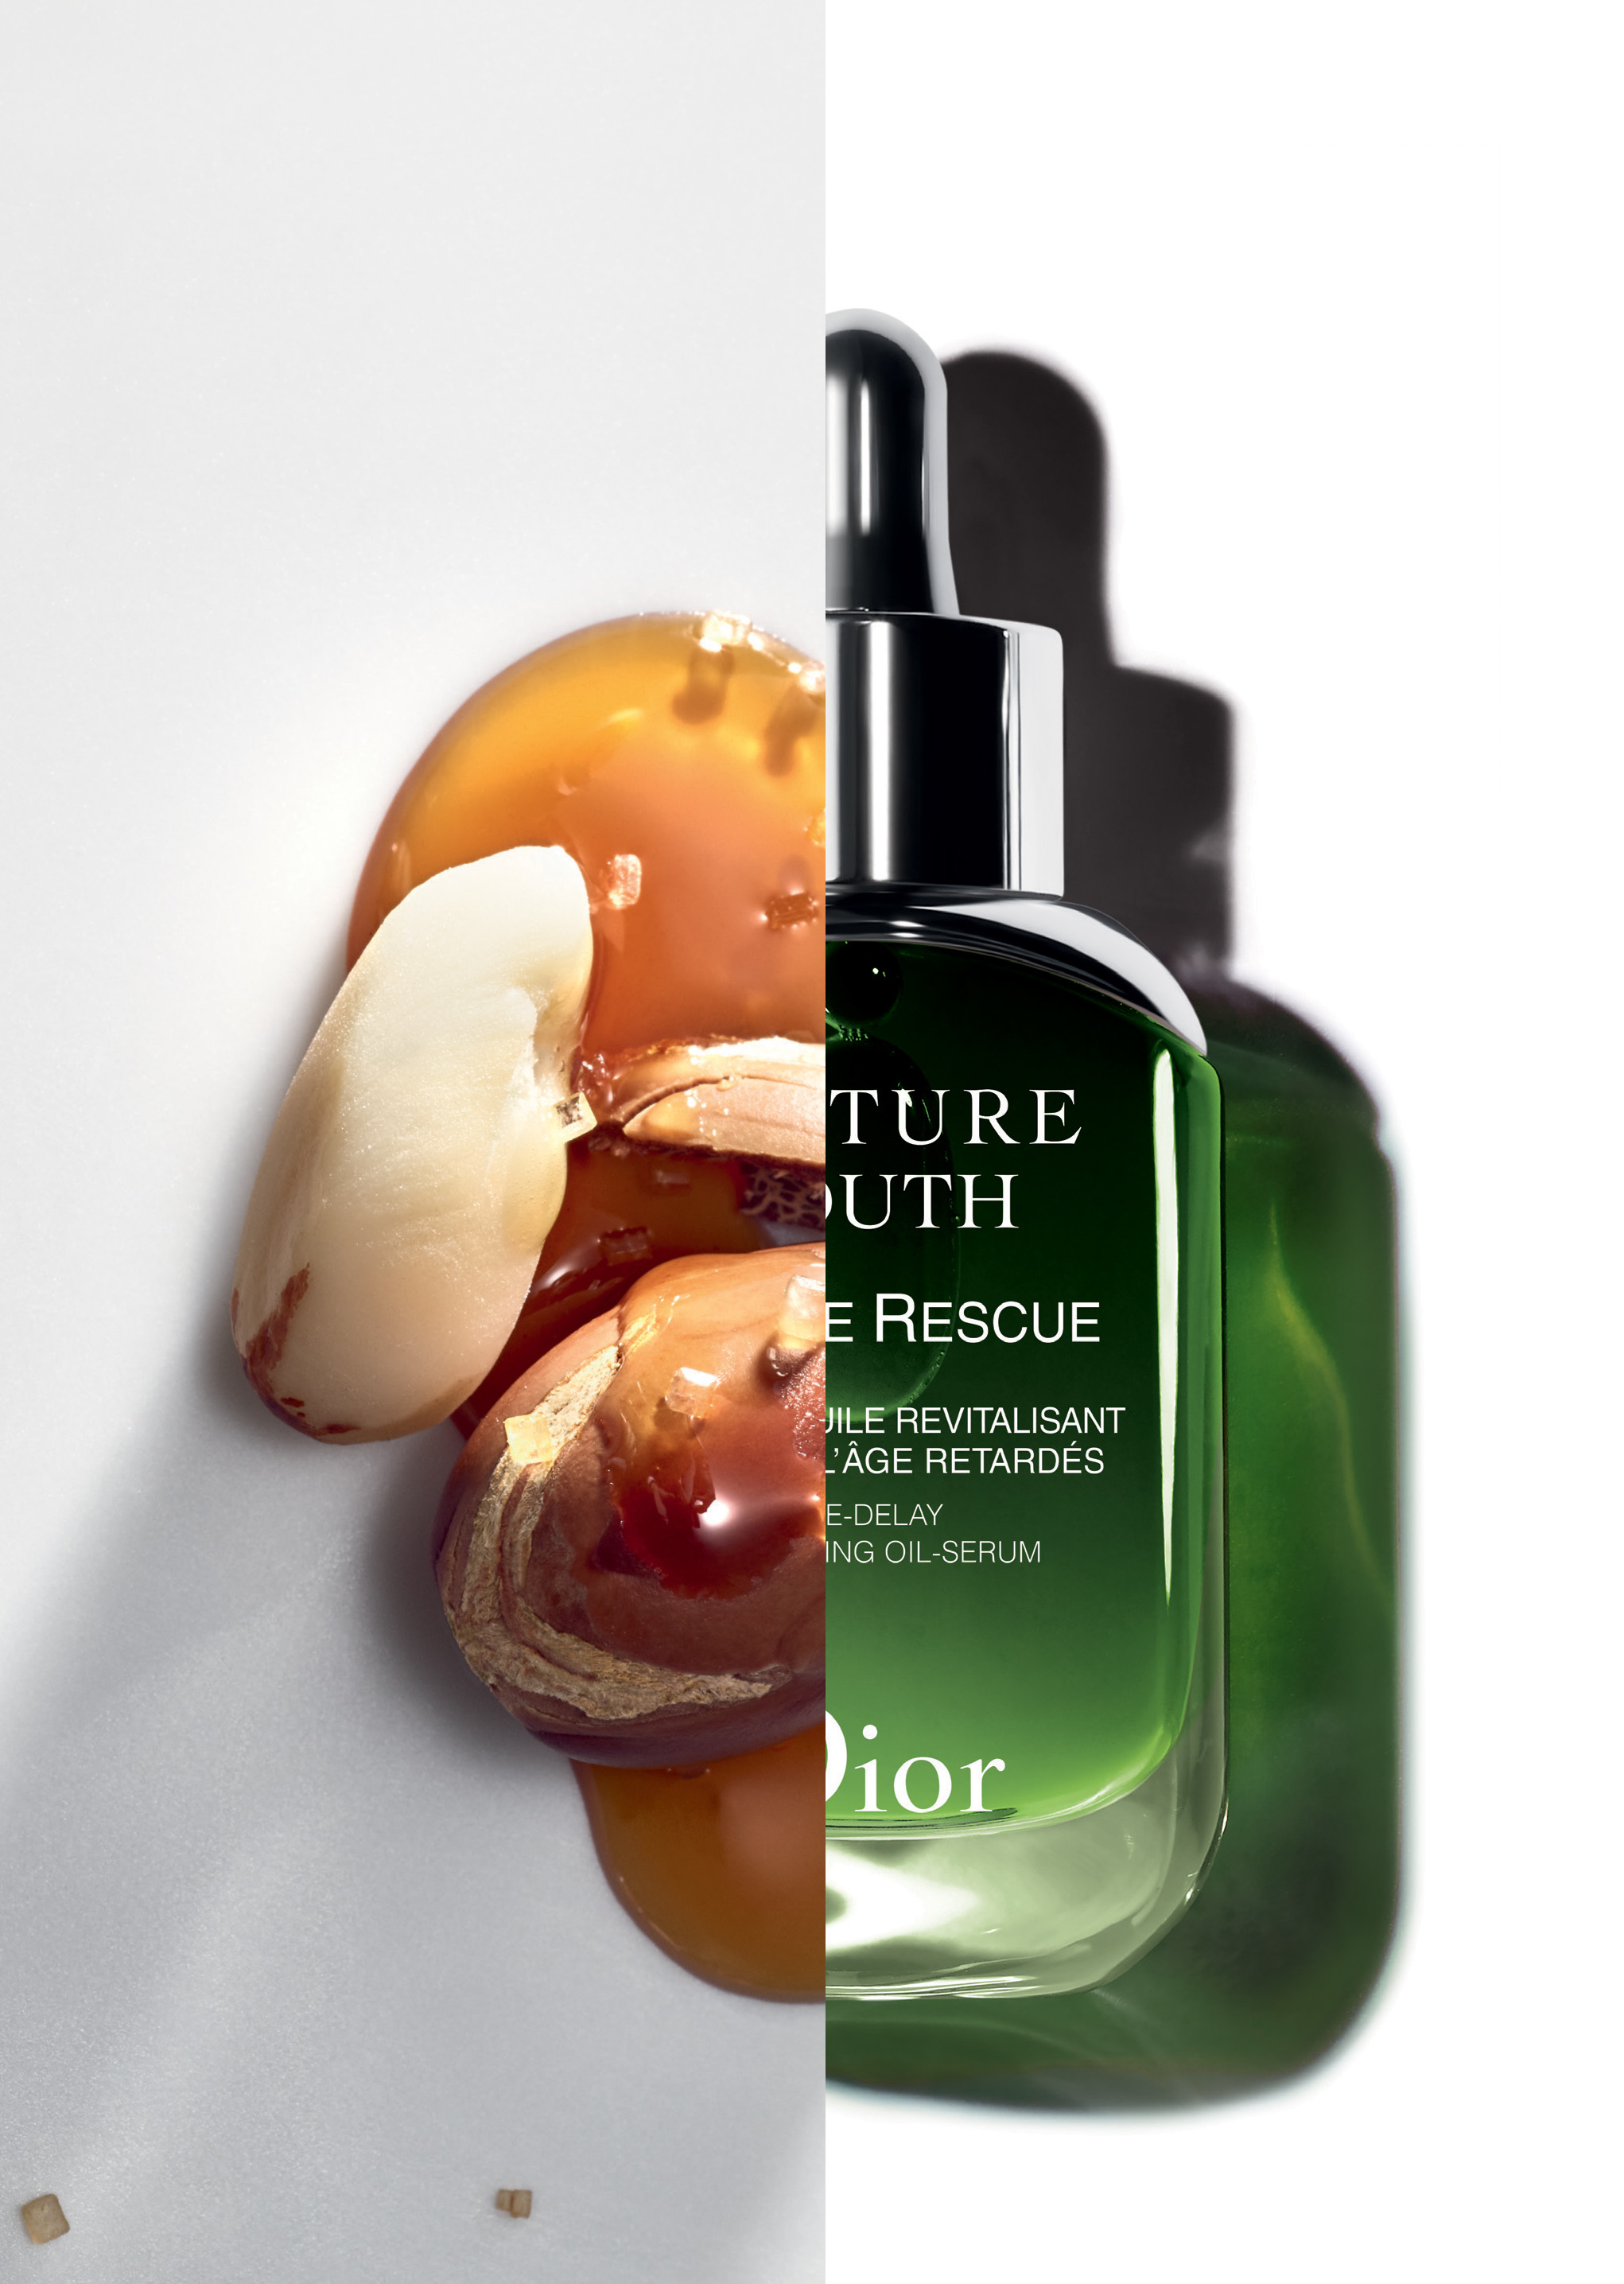  The Intense Rescue oil serum can be used in three different ways to suit your most pressing needs: with the Age-Delay cream, as an overnight remedy or as a soothing concentrate